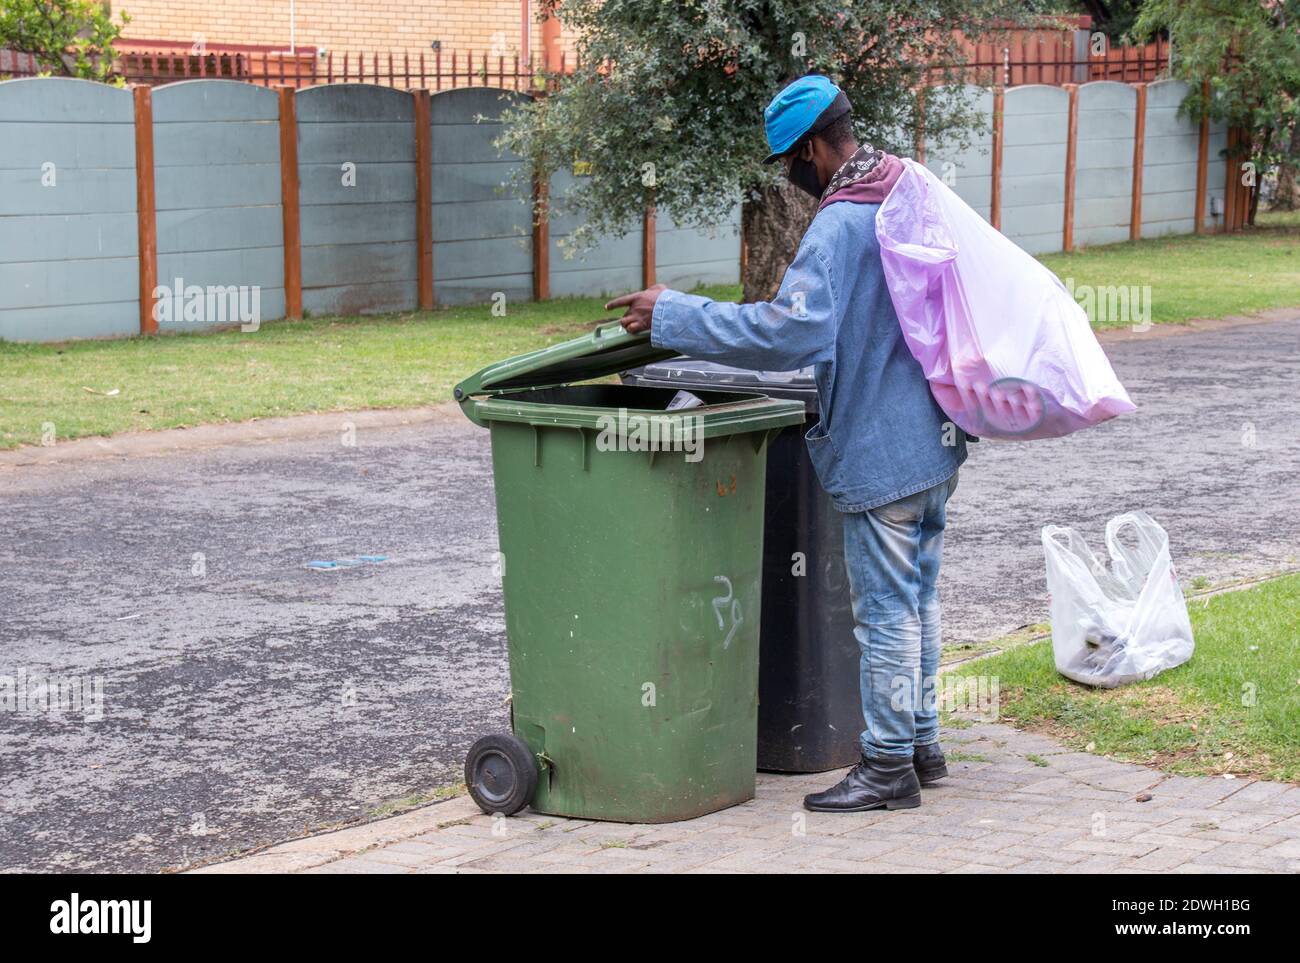 Johannesburg, South Africa - dustbin diving to salvage plastic, food and discarded items by poor and homeless people to make a living Stock Photo